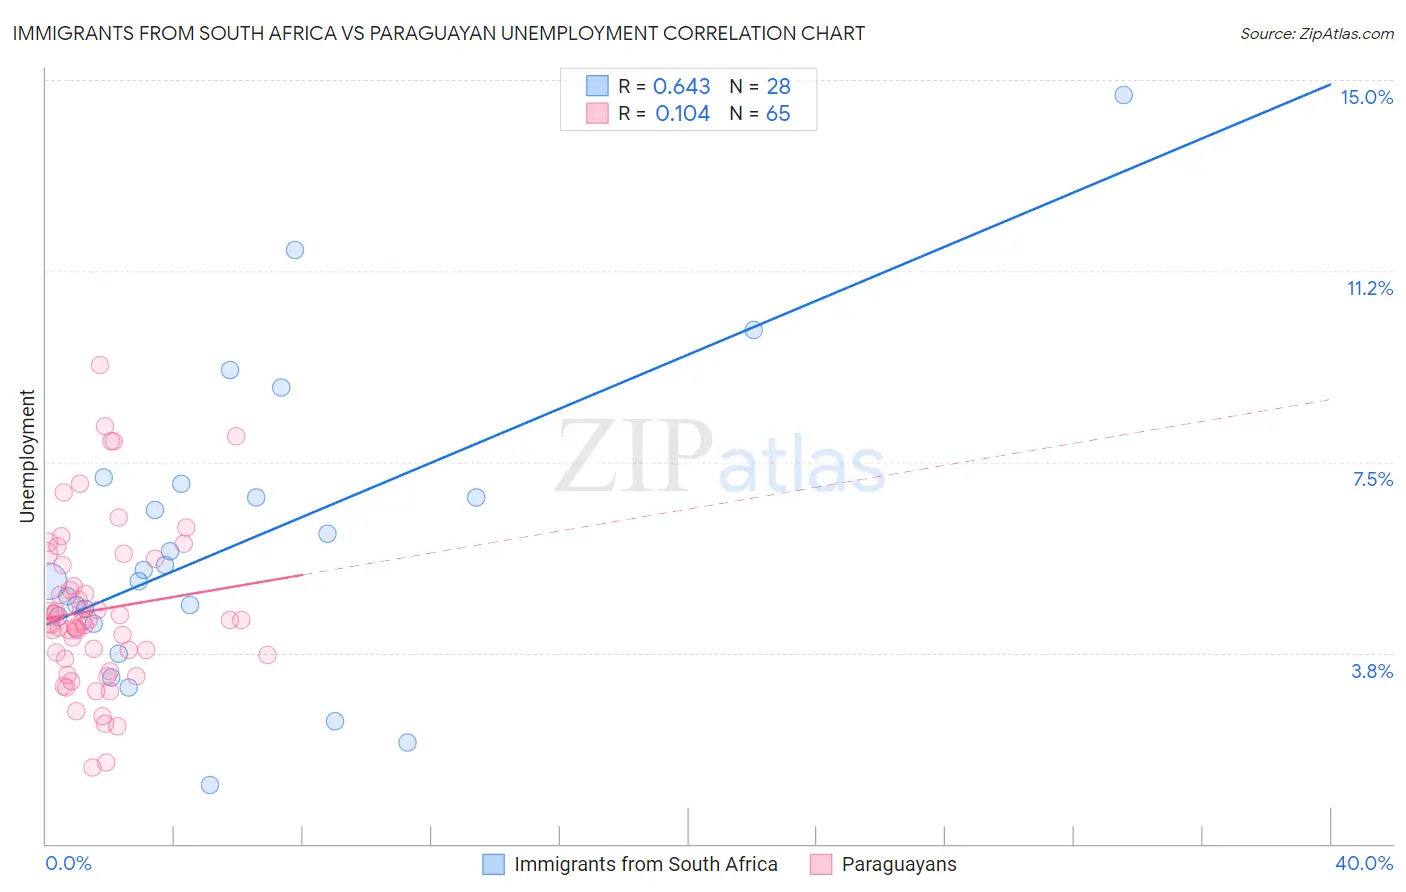 Immigrants from South Africa vs Paraguayan Unemployment